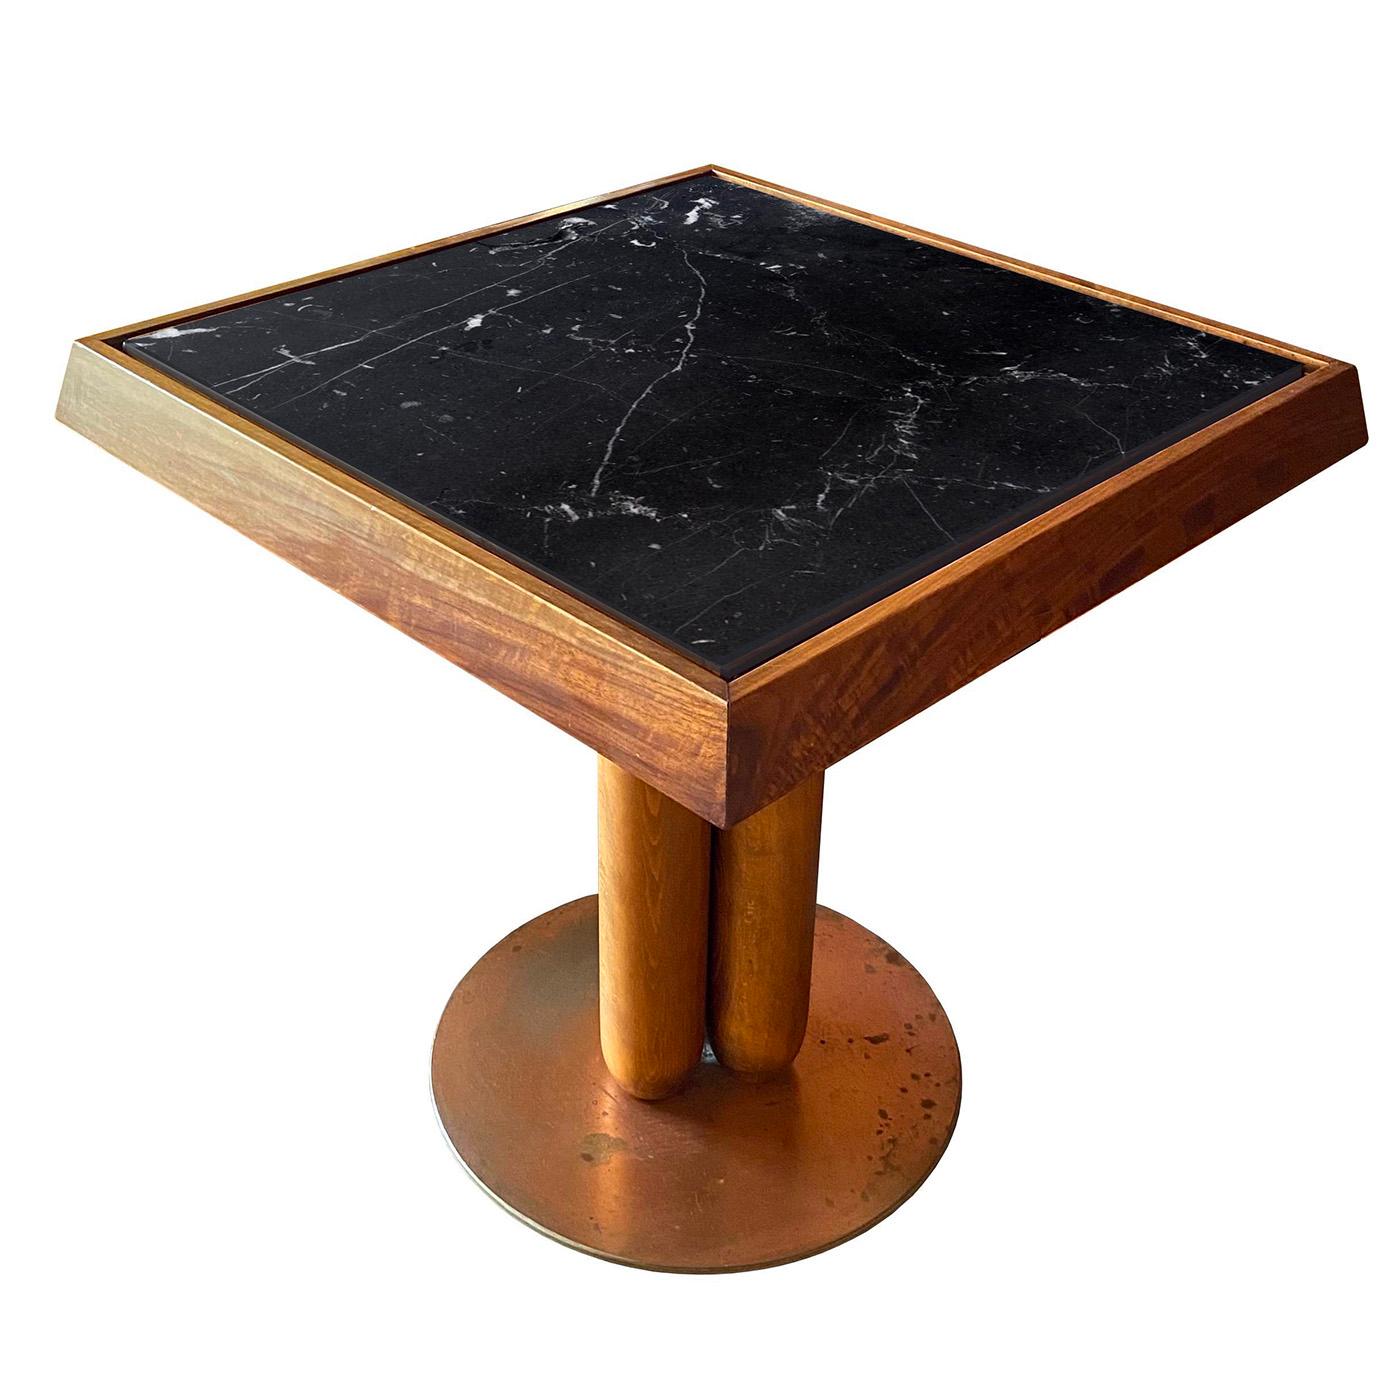 This refined coffee table is an original piece designed in 2014 by Ferdinando Meccani now part of a 2022 limited series of only ten numbered pieces. An outstanding element is the prized square top in black Marquinia marble, which is offered in an